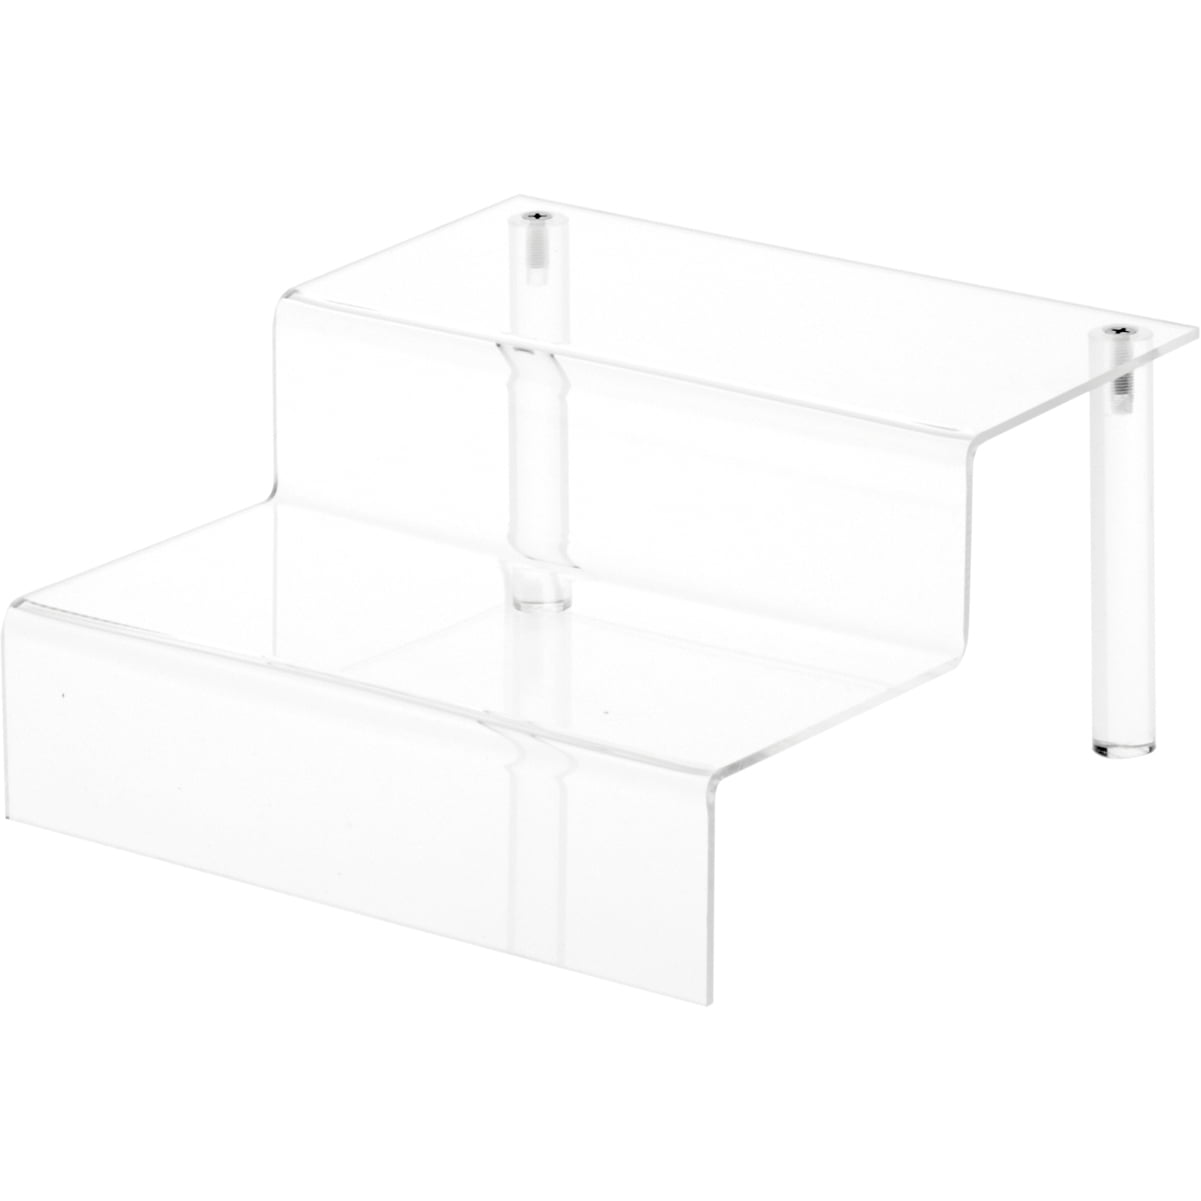 3 H x 12 W x 8 D Plymor Clear Acrylic Display Riser with Tray Handles 3/16 Thick